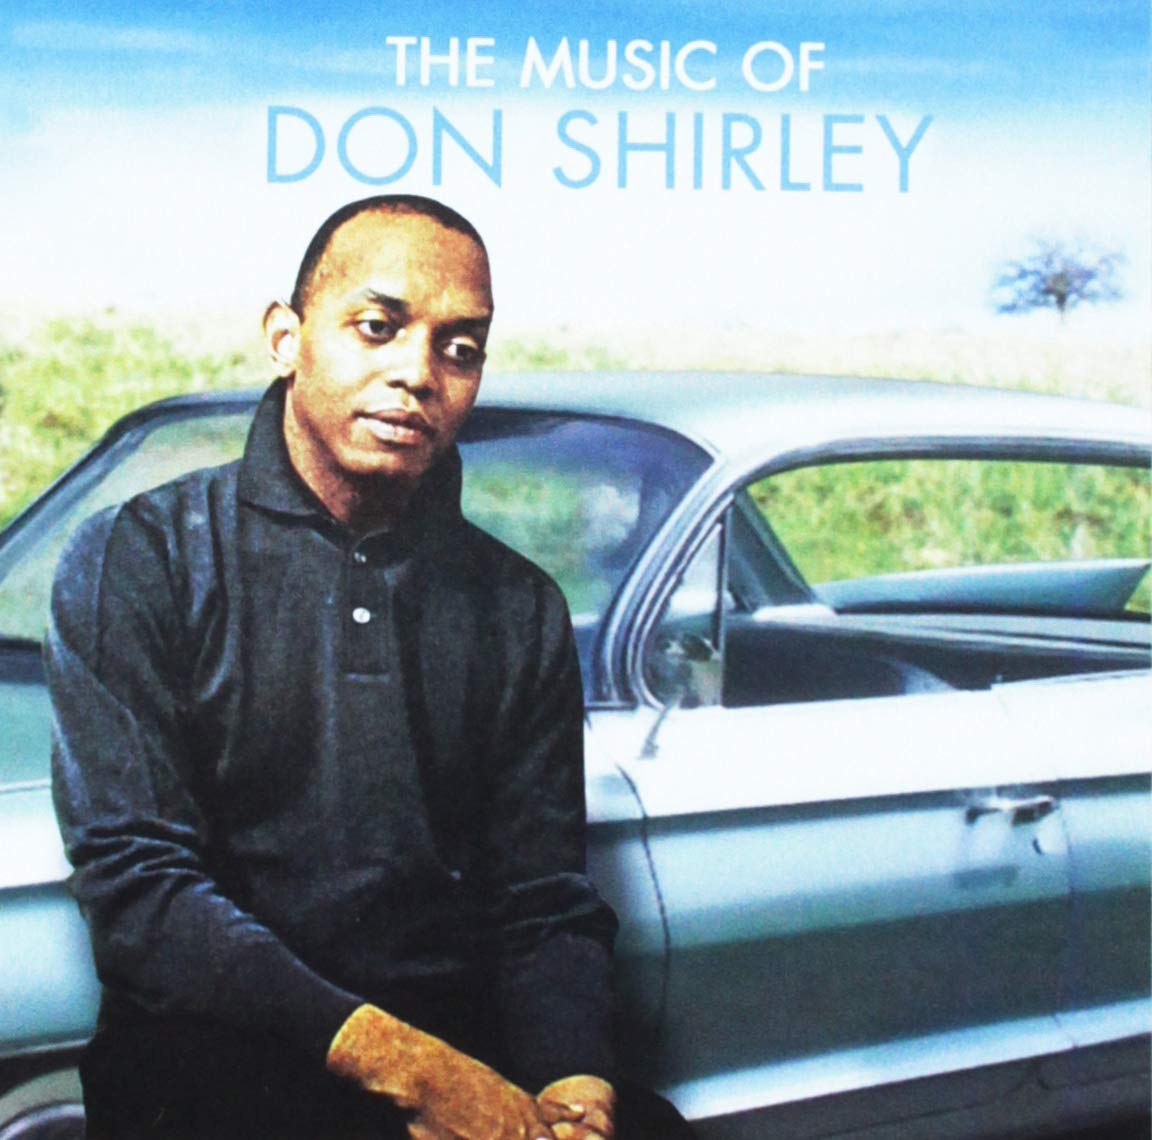 Shirley, Don/The Music Of [CD]